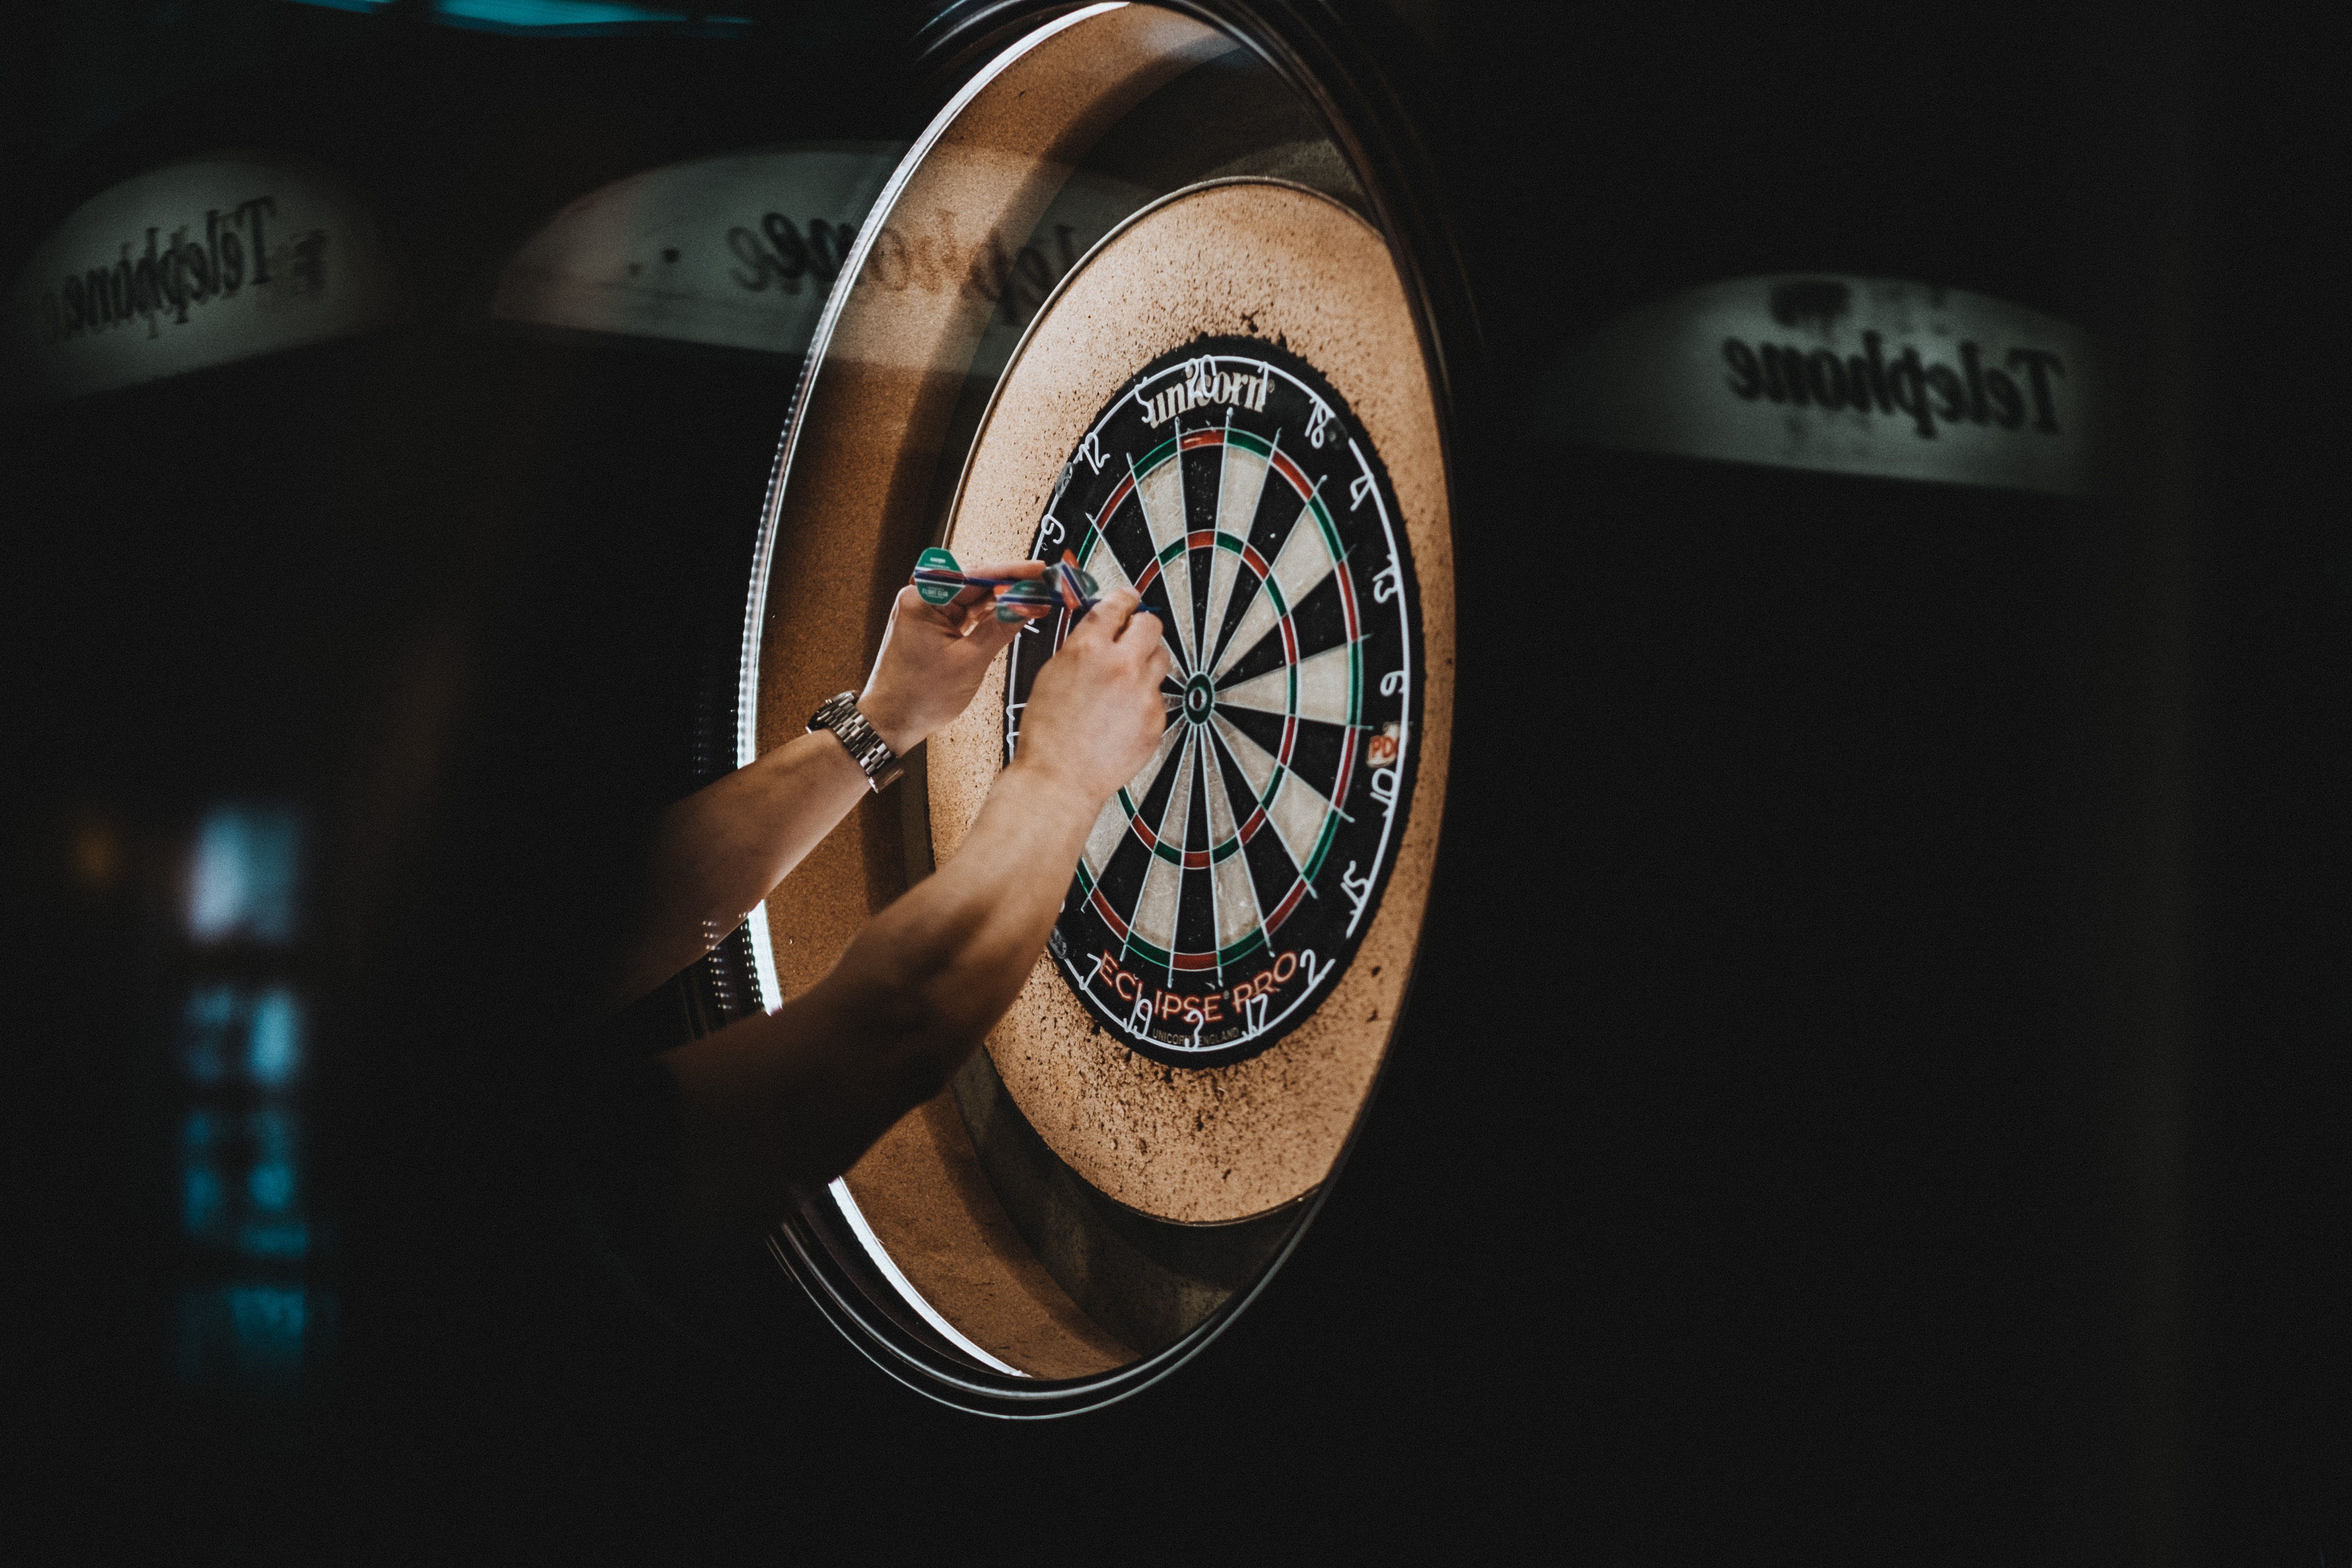 5400x3600 #darts, #background, #sport, #circle, #hand, #wallpaper, #play, #watch, #reflection, #arm, #game, #fun, #night, #typography, #light, #dartboard, #Creative Commons image, #fashion, #evening, #telephone box, #hands HD Wallpaper